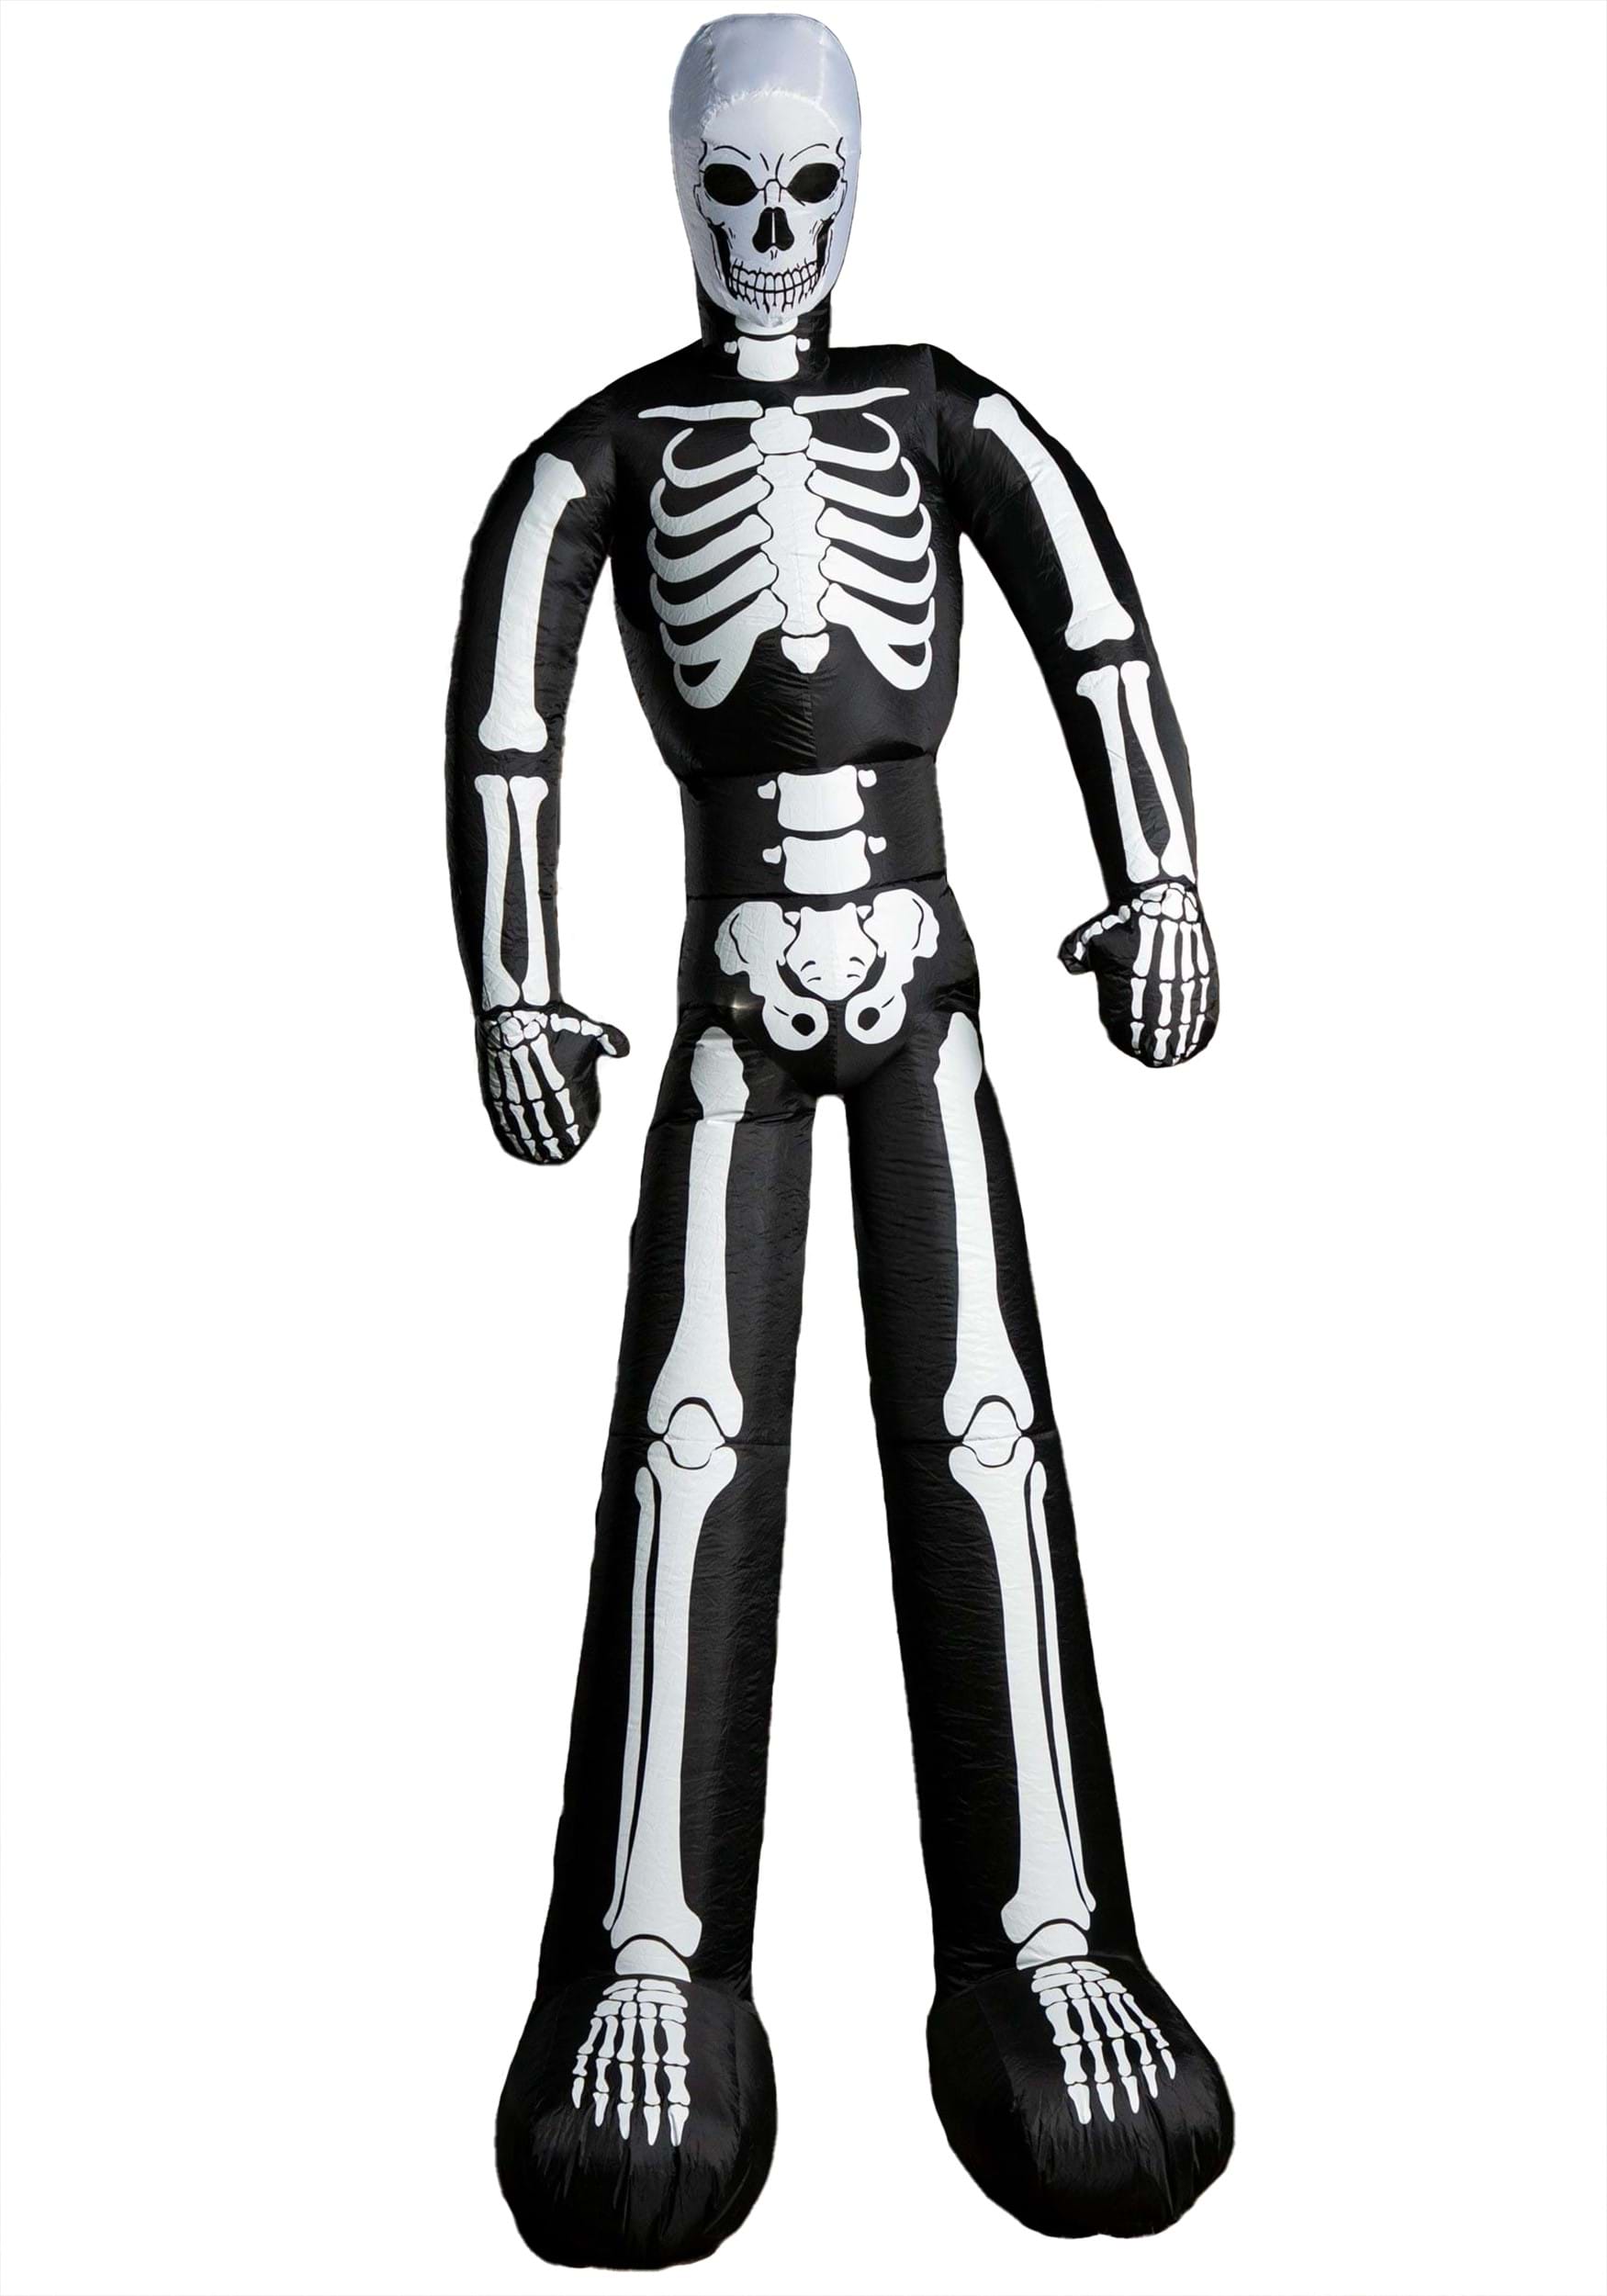 Image of 12 Foot Skeleton Inflatable Decoration | Inflatable Halloween Decorations ID FUN3274-ST